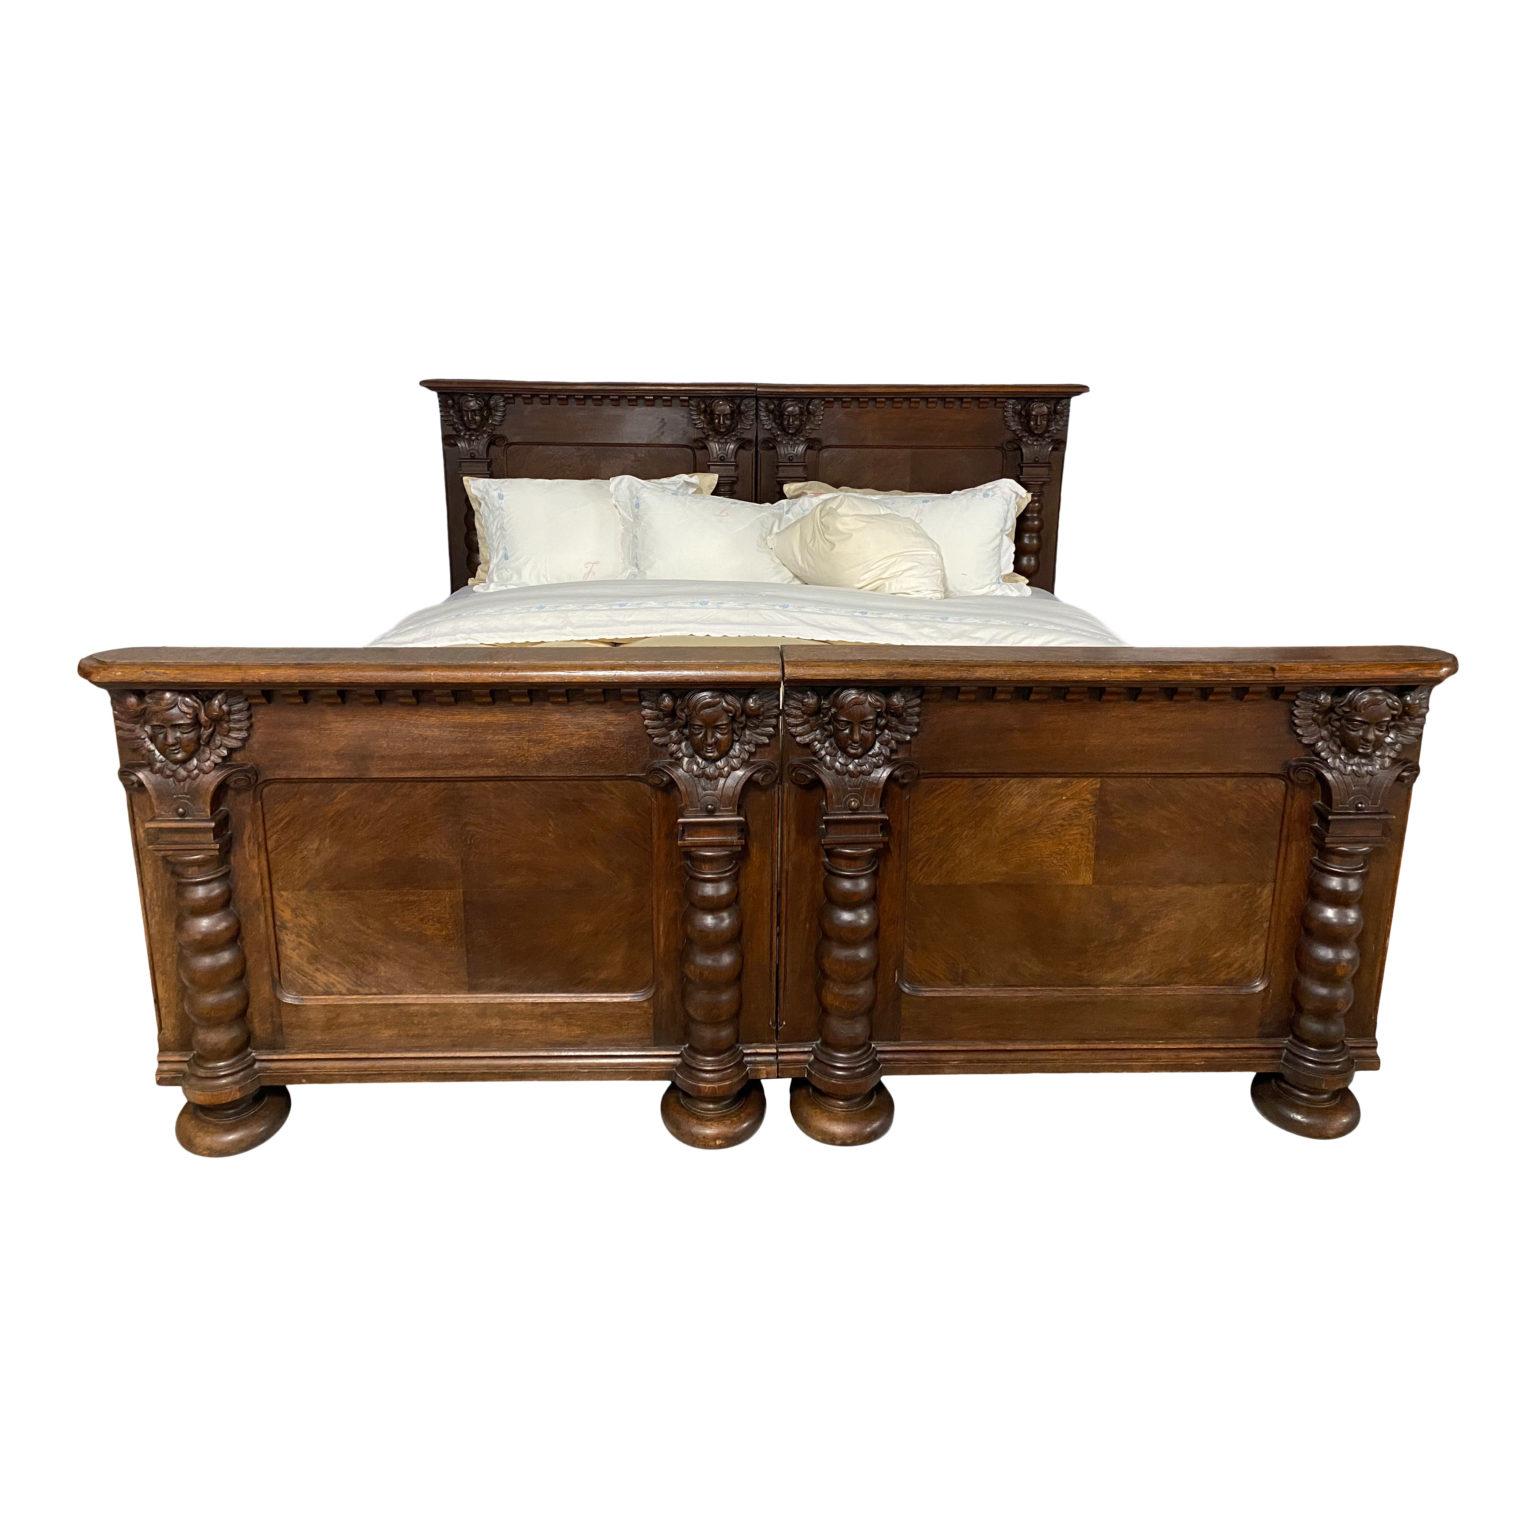 Antique Portugese Bed In Good Condition For Sale In Sag Harbor, NY